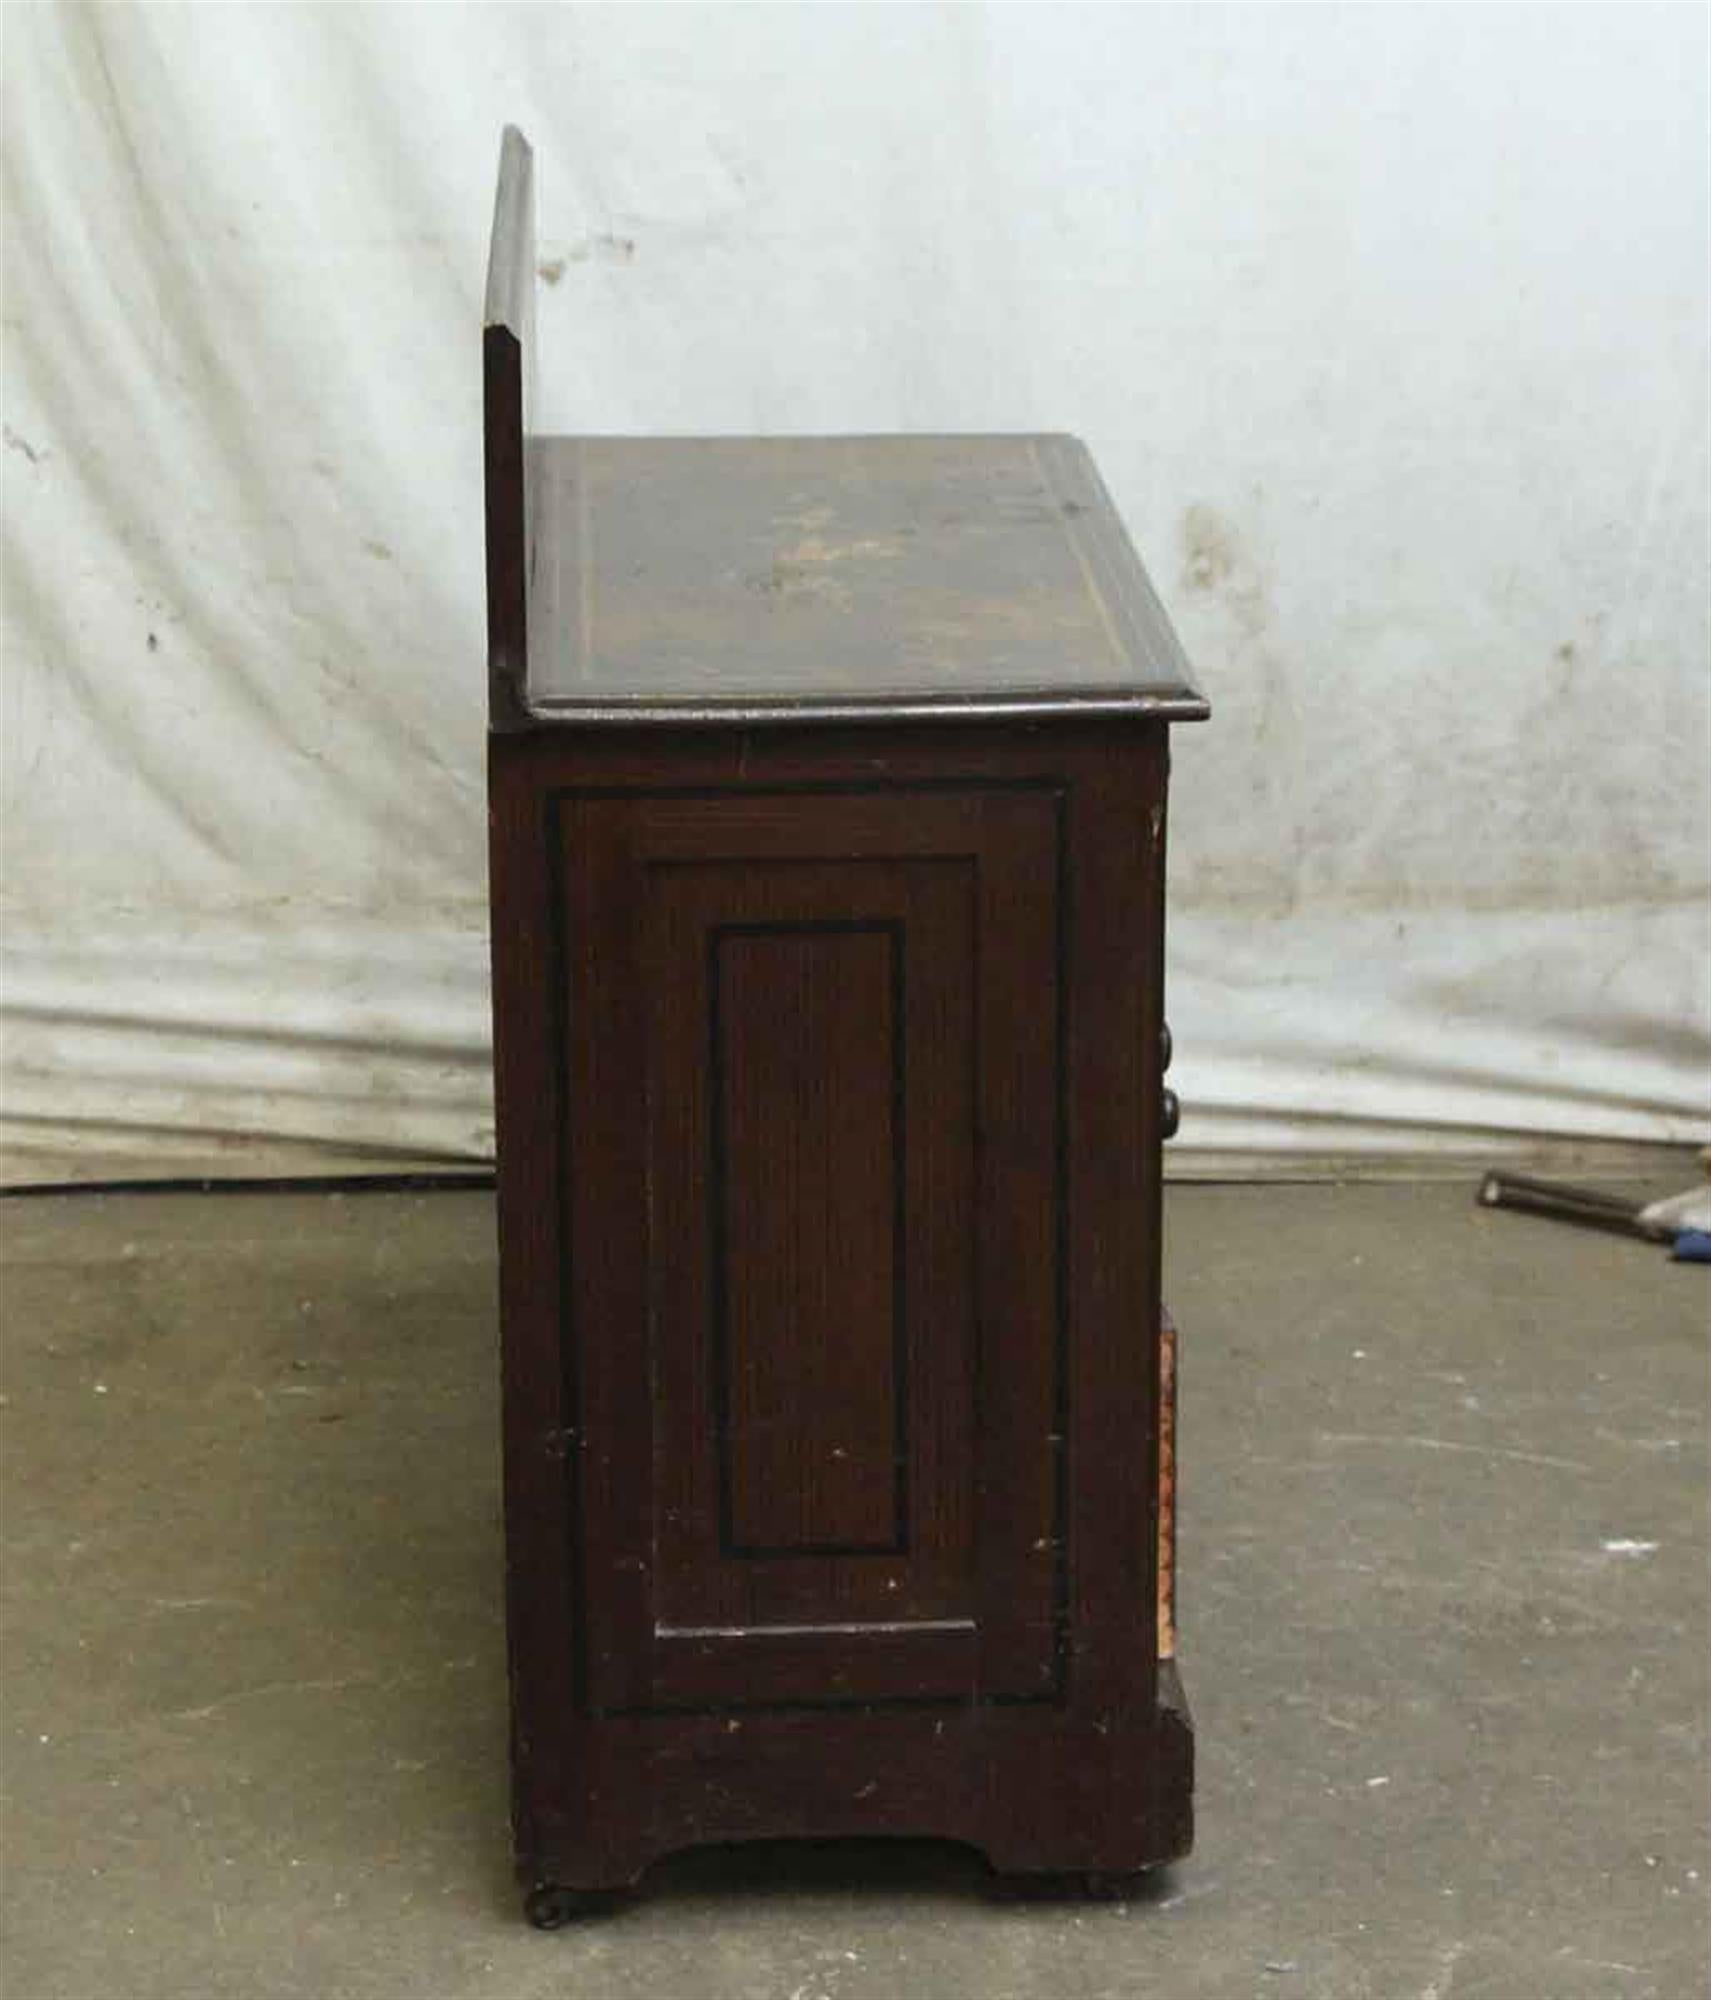 1880s Wooden Dark Tone Wash Stand with a Hand Painted Decorative Finish 3